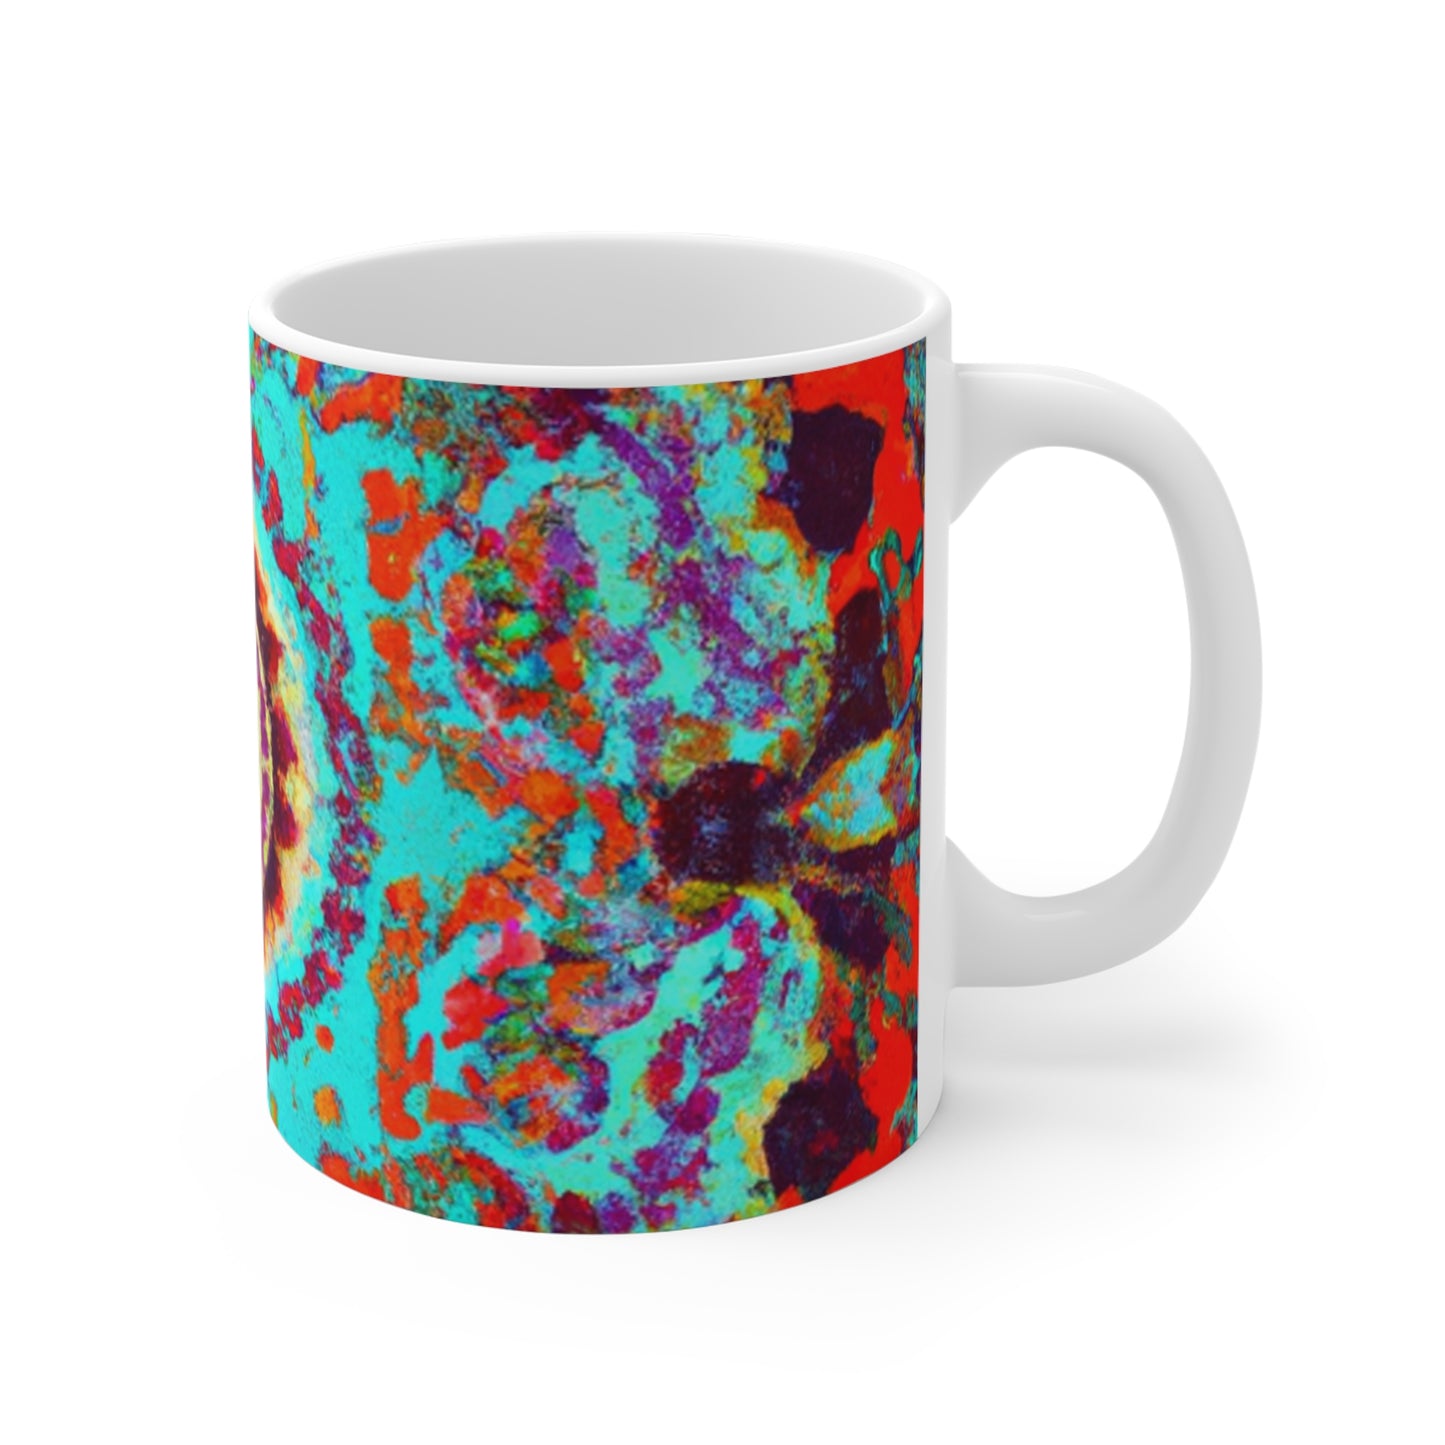 Buster's Brew Concoctions - Psychedelic Coffee Cup Mug 11 Ounce